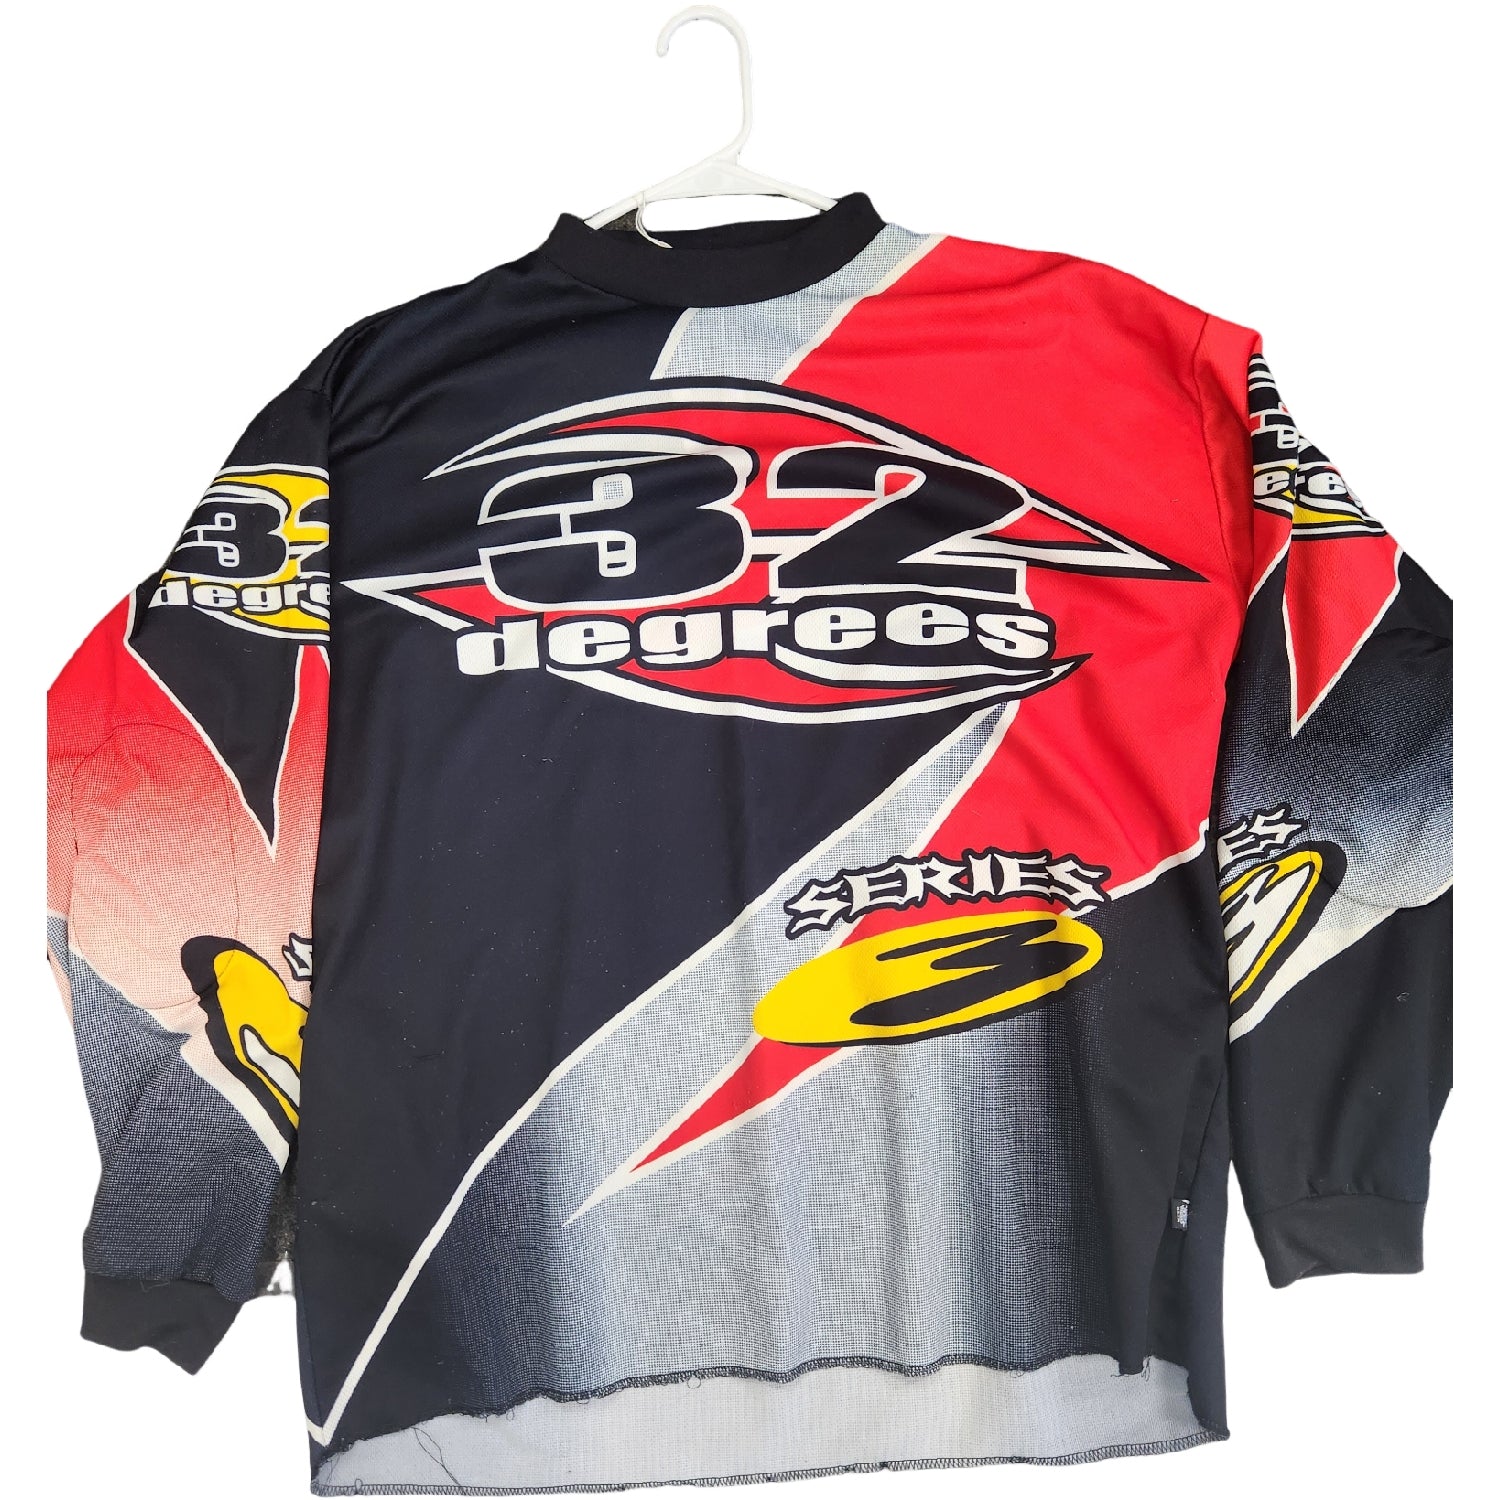 32 Degrees Jersey - Red/Black